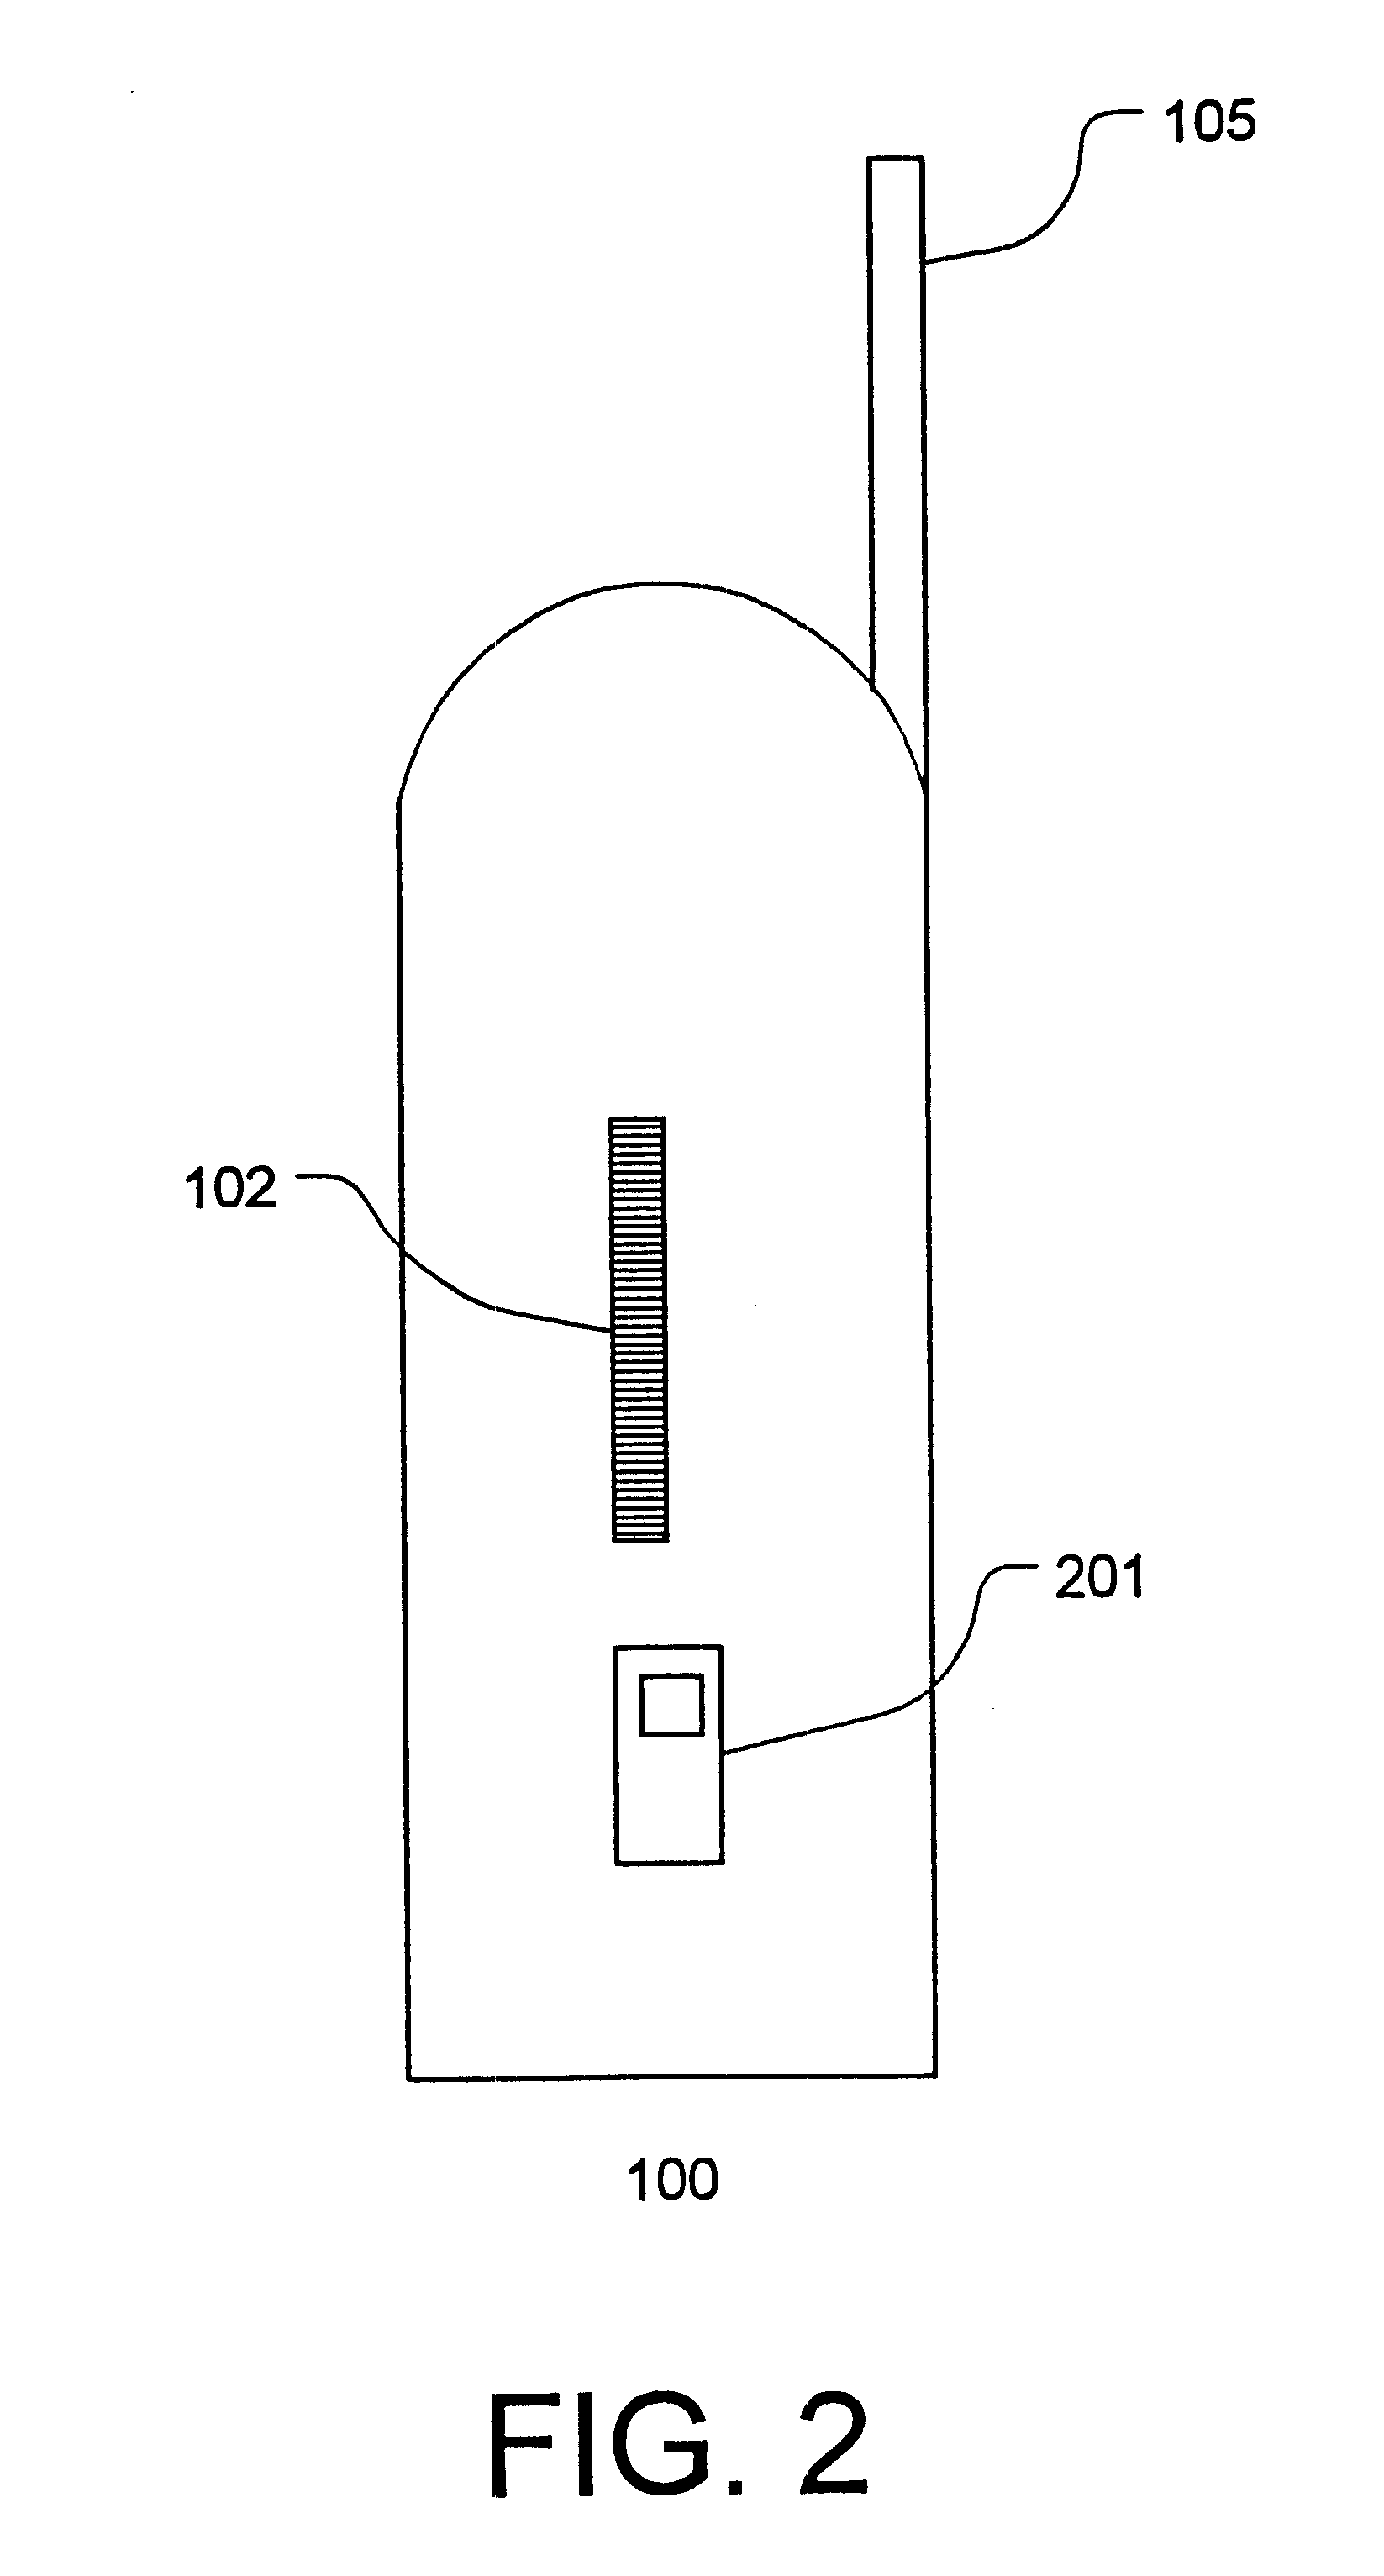 Baby monitor, system, and method and control of remote devices